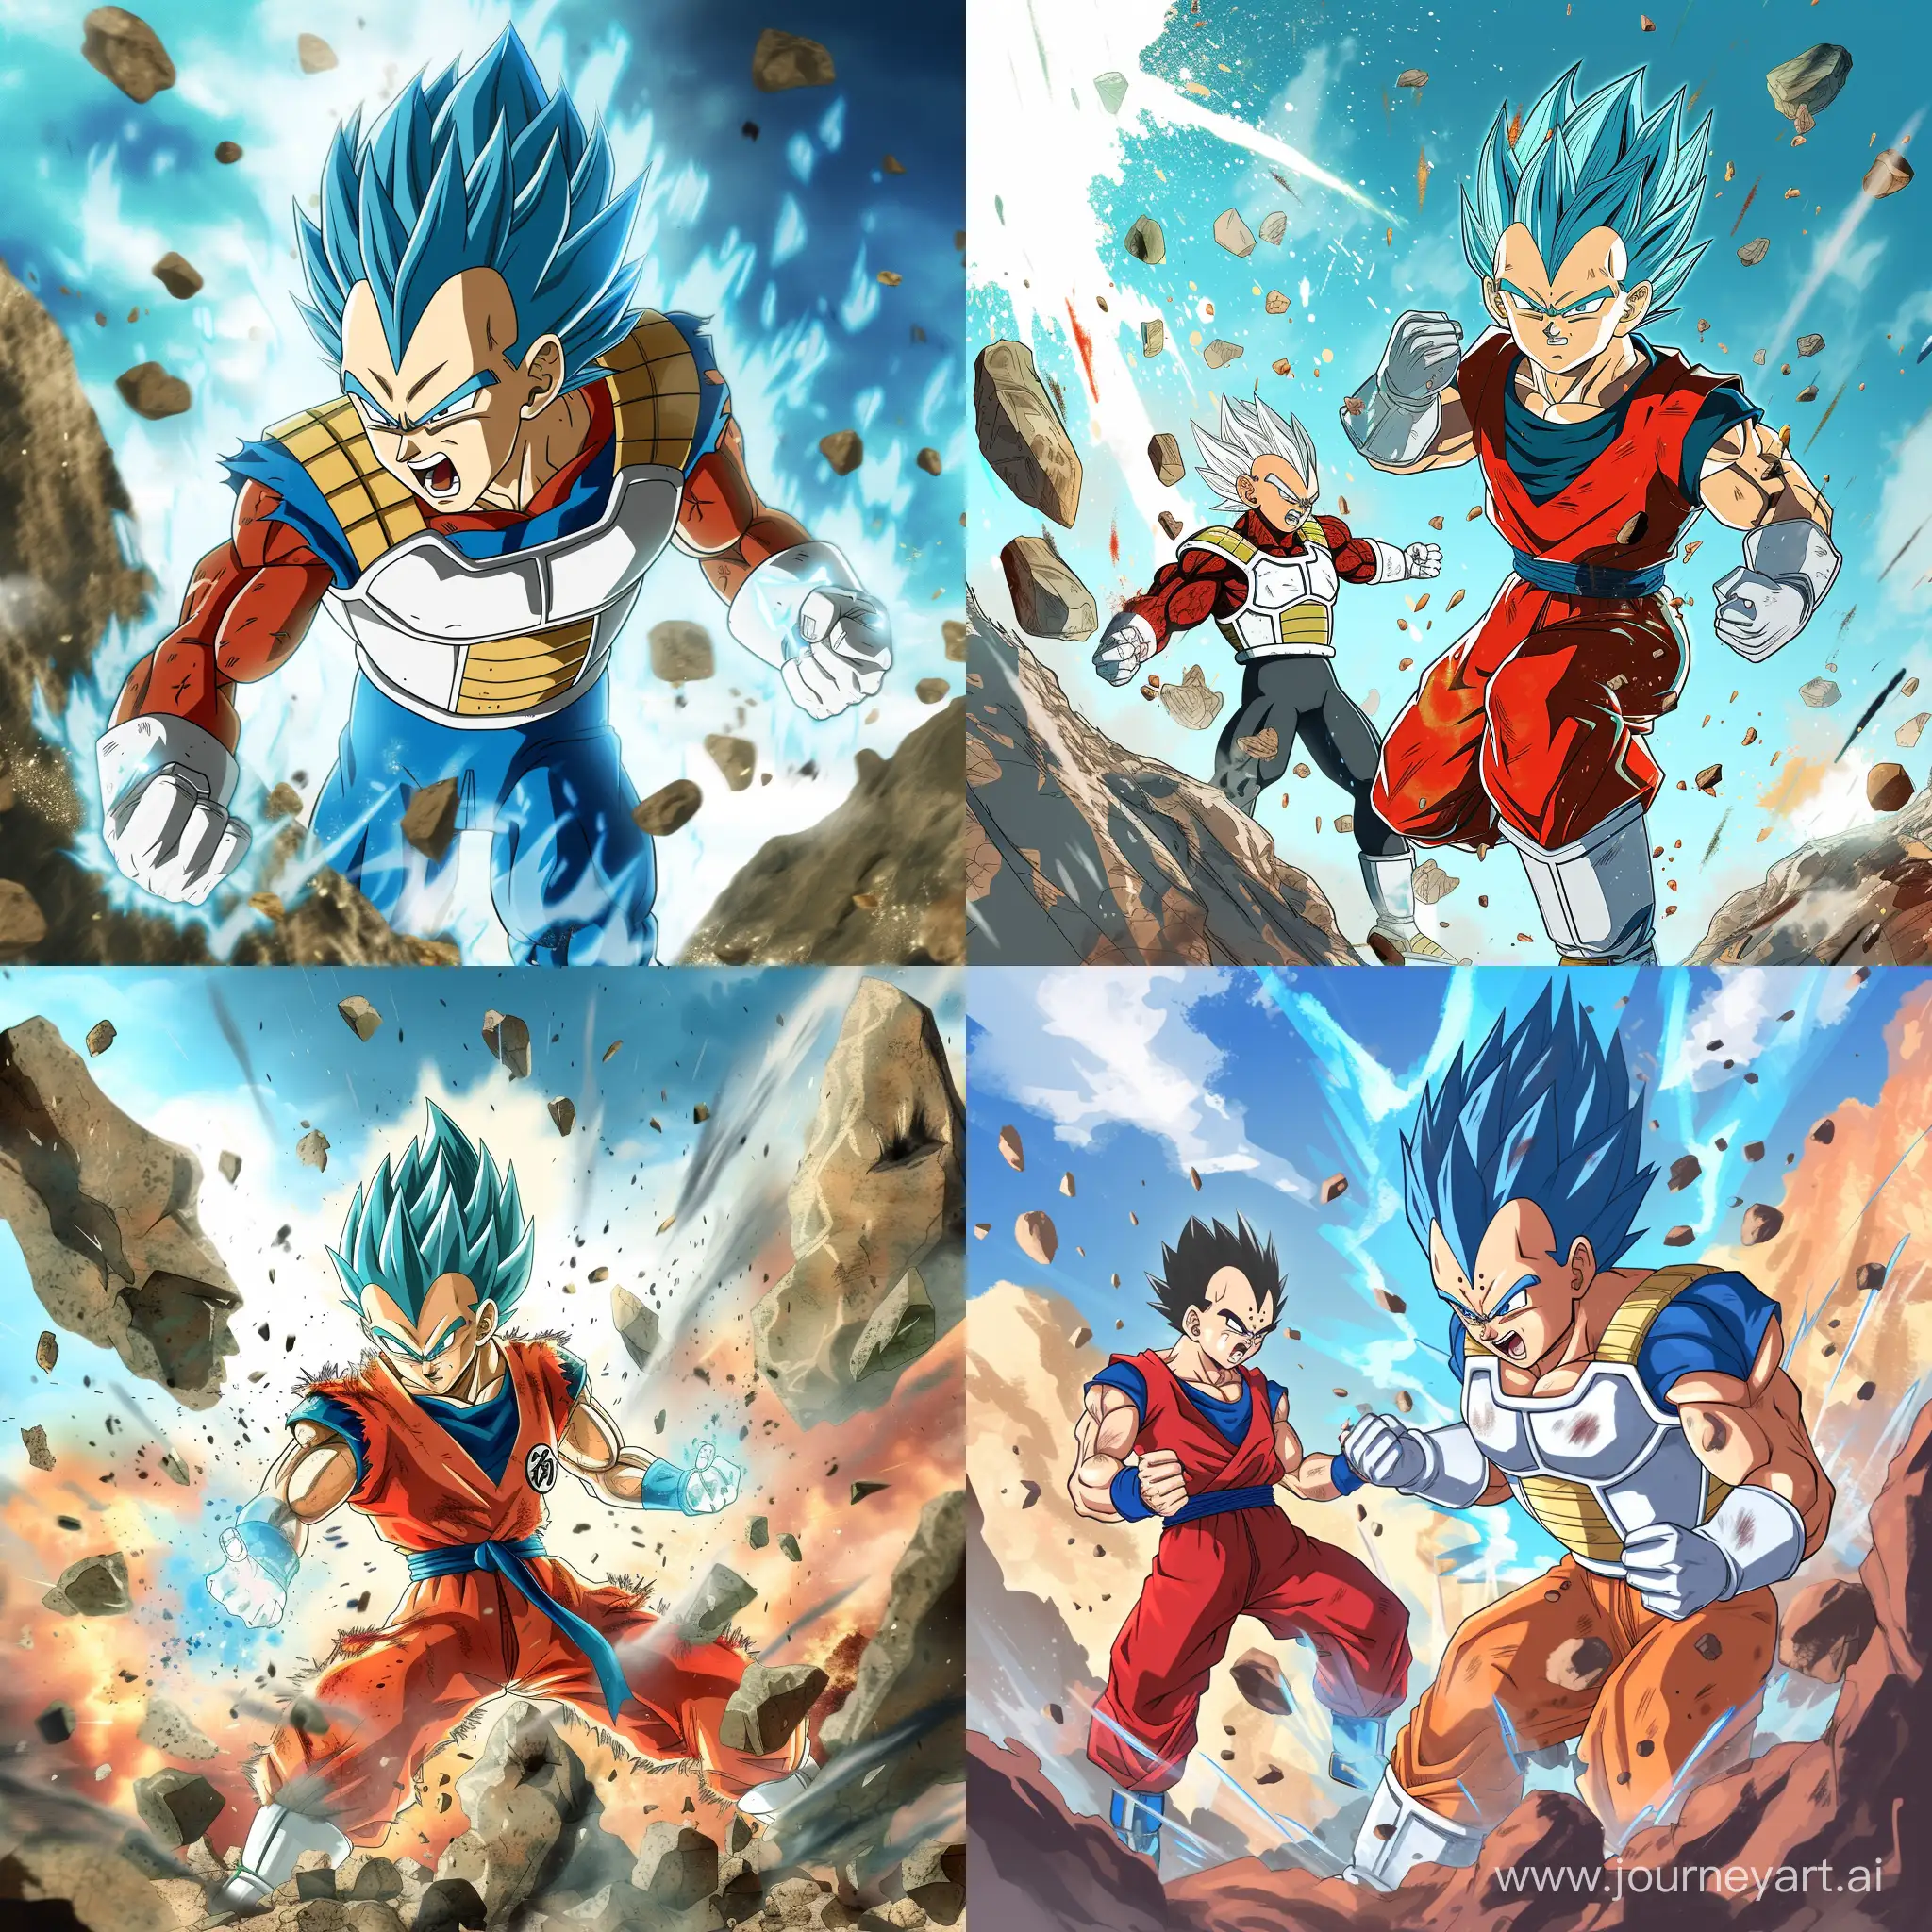 Dragon ball Z blue hair vegeta with anger mod stand in rock fight with Goku Dynamic background